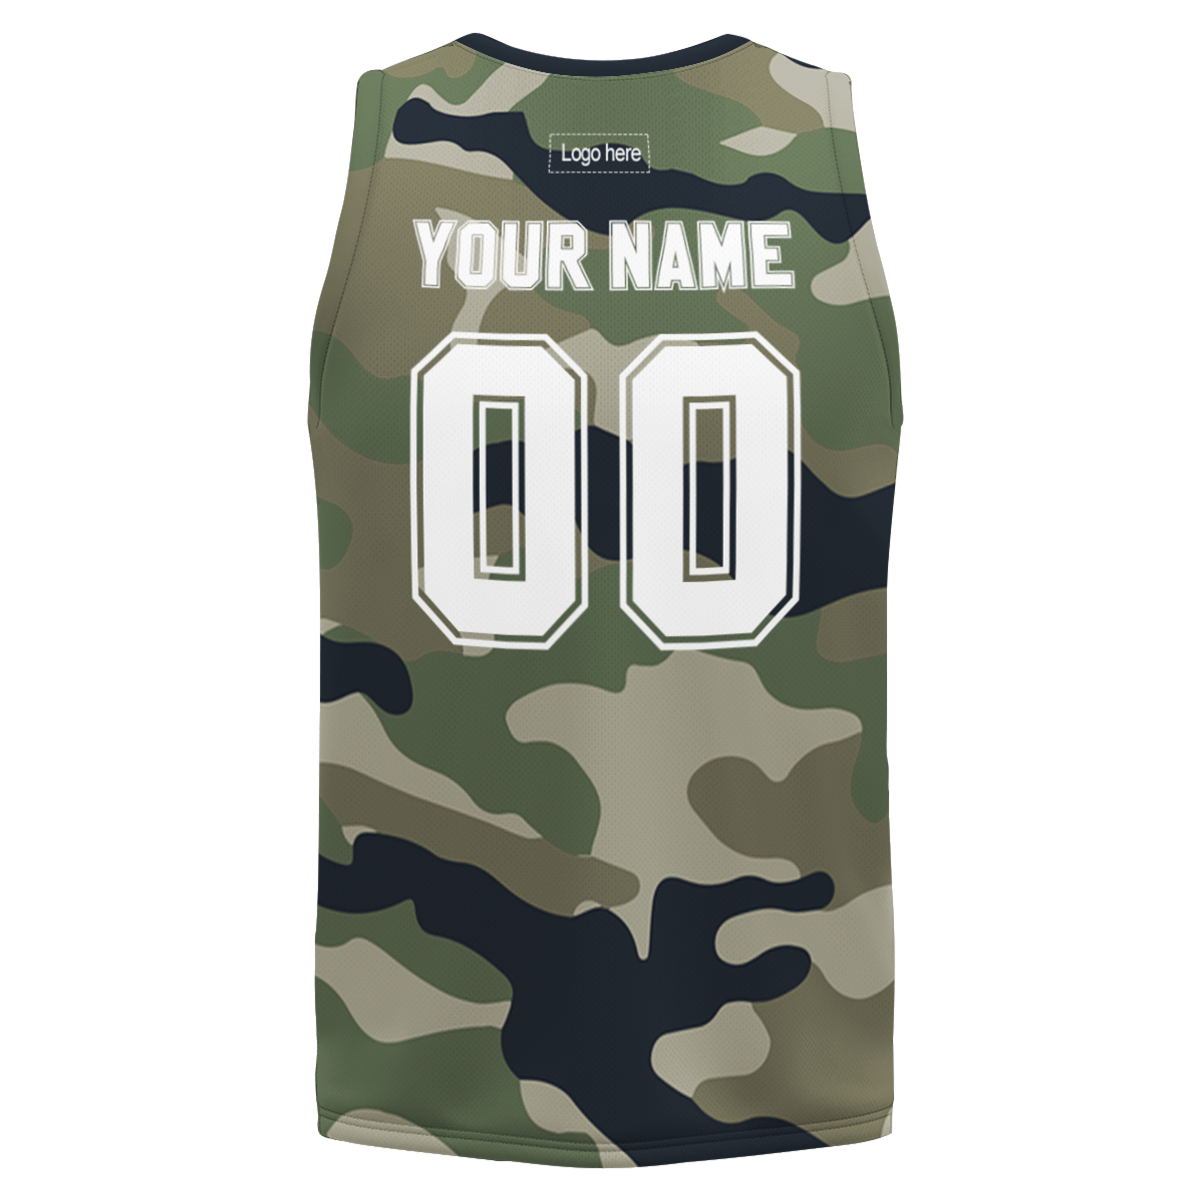 customized-basketball-uniforms-personalized-design-printing-sport-clothes-summer-basketball-jerseys-for-men-at-cj-pod-6